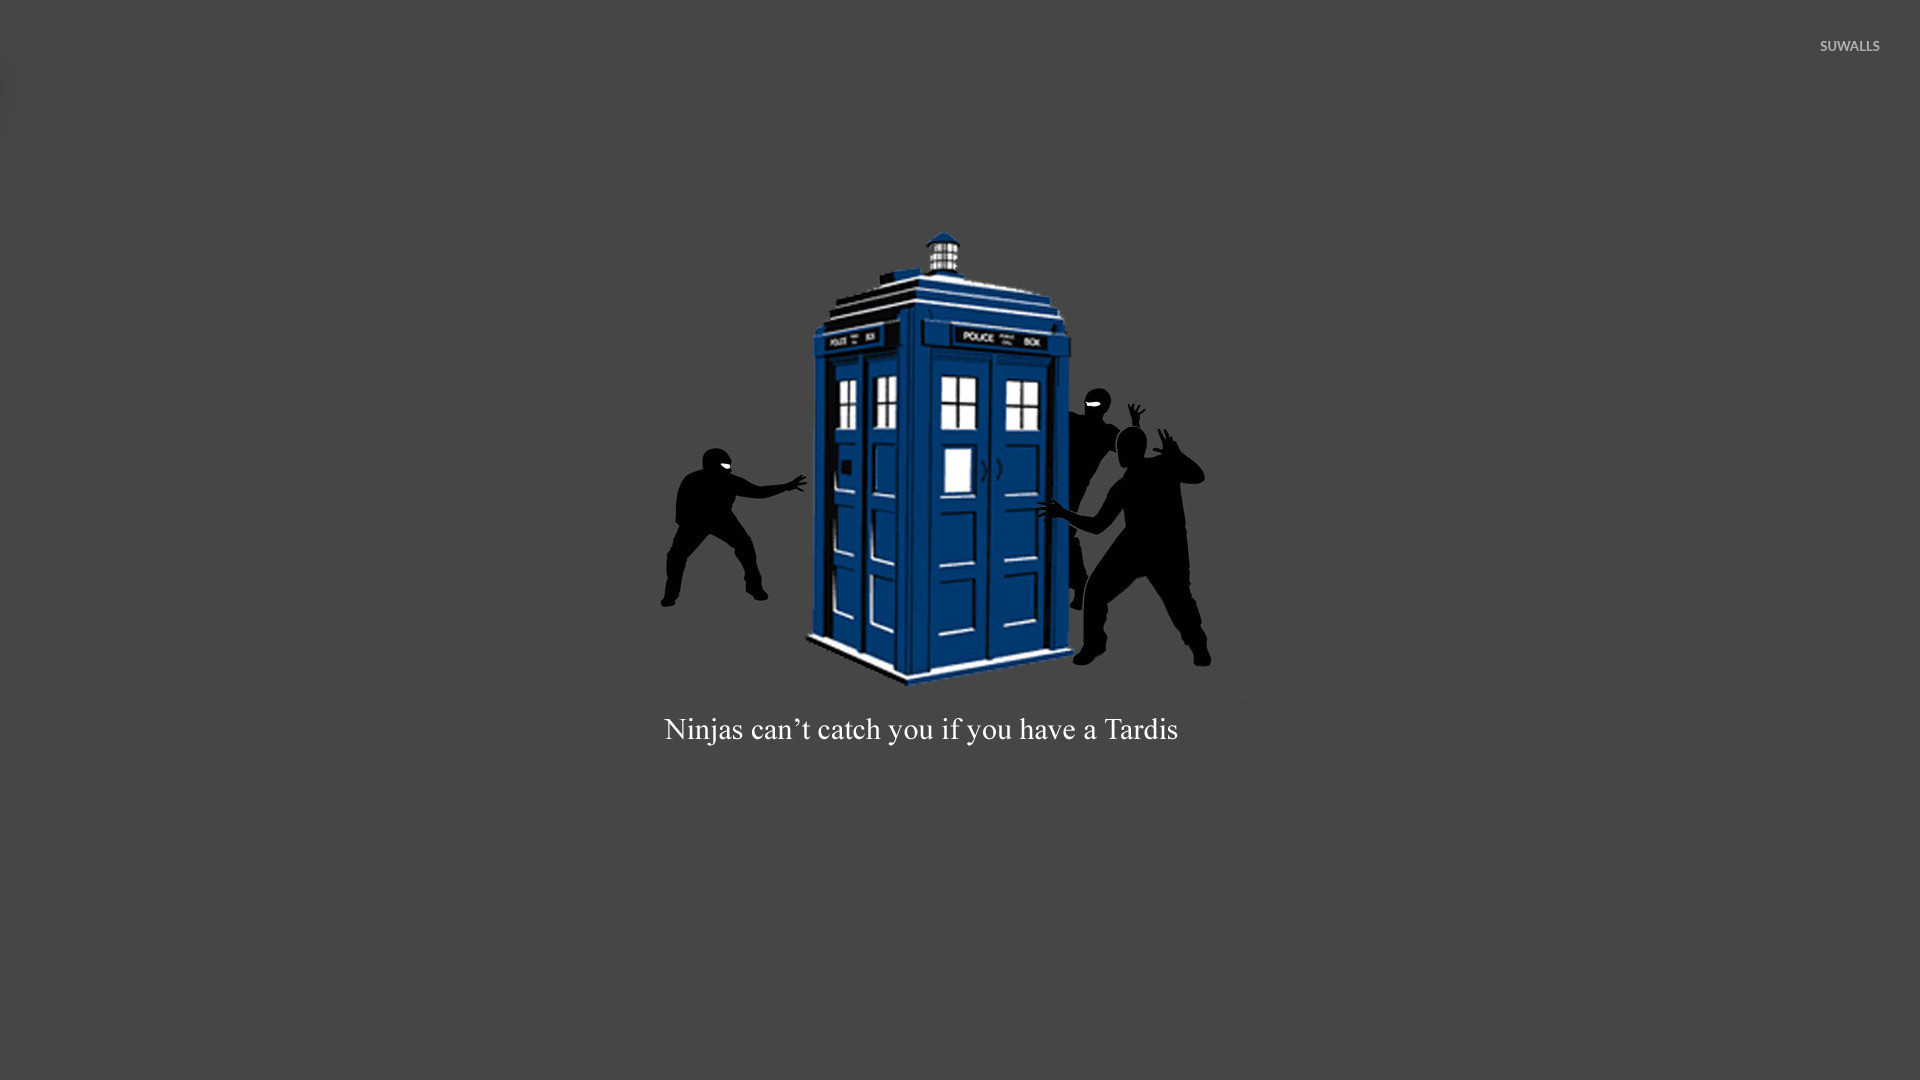 1920x1080 Ninjas can't catch you if you have a Tardis wallpaper